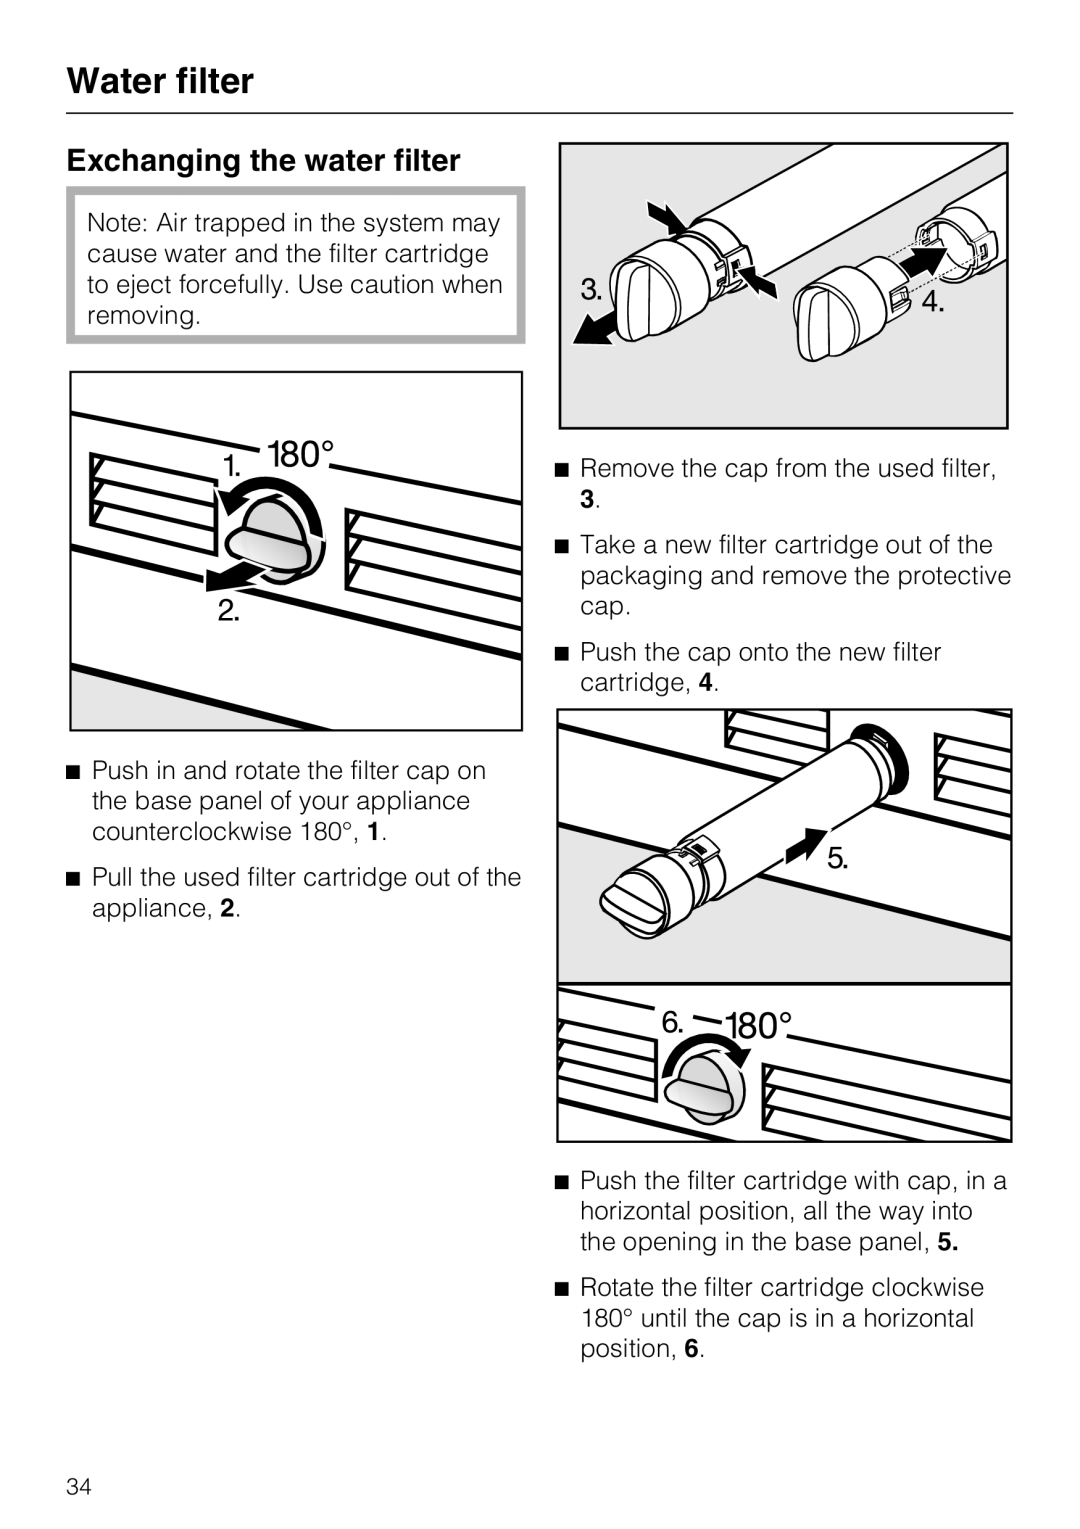 Miele KF 1811 SF, KF 1911 SF, KF 1801 SF, KF 1901 SF installation instructions Exchanging the water filter, Water filter 